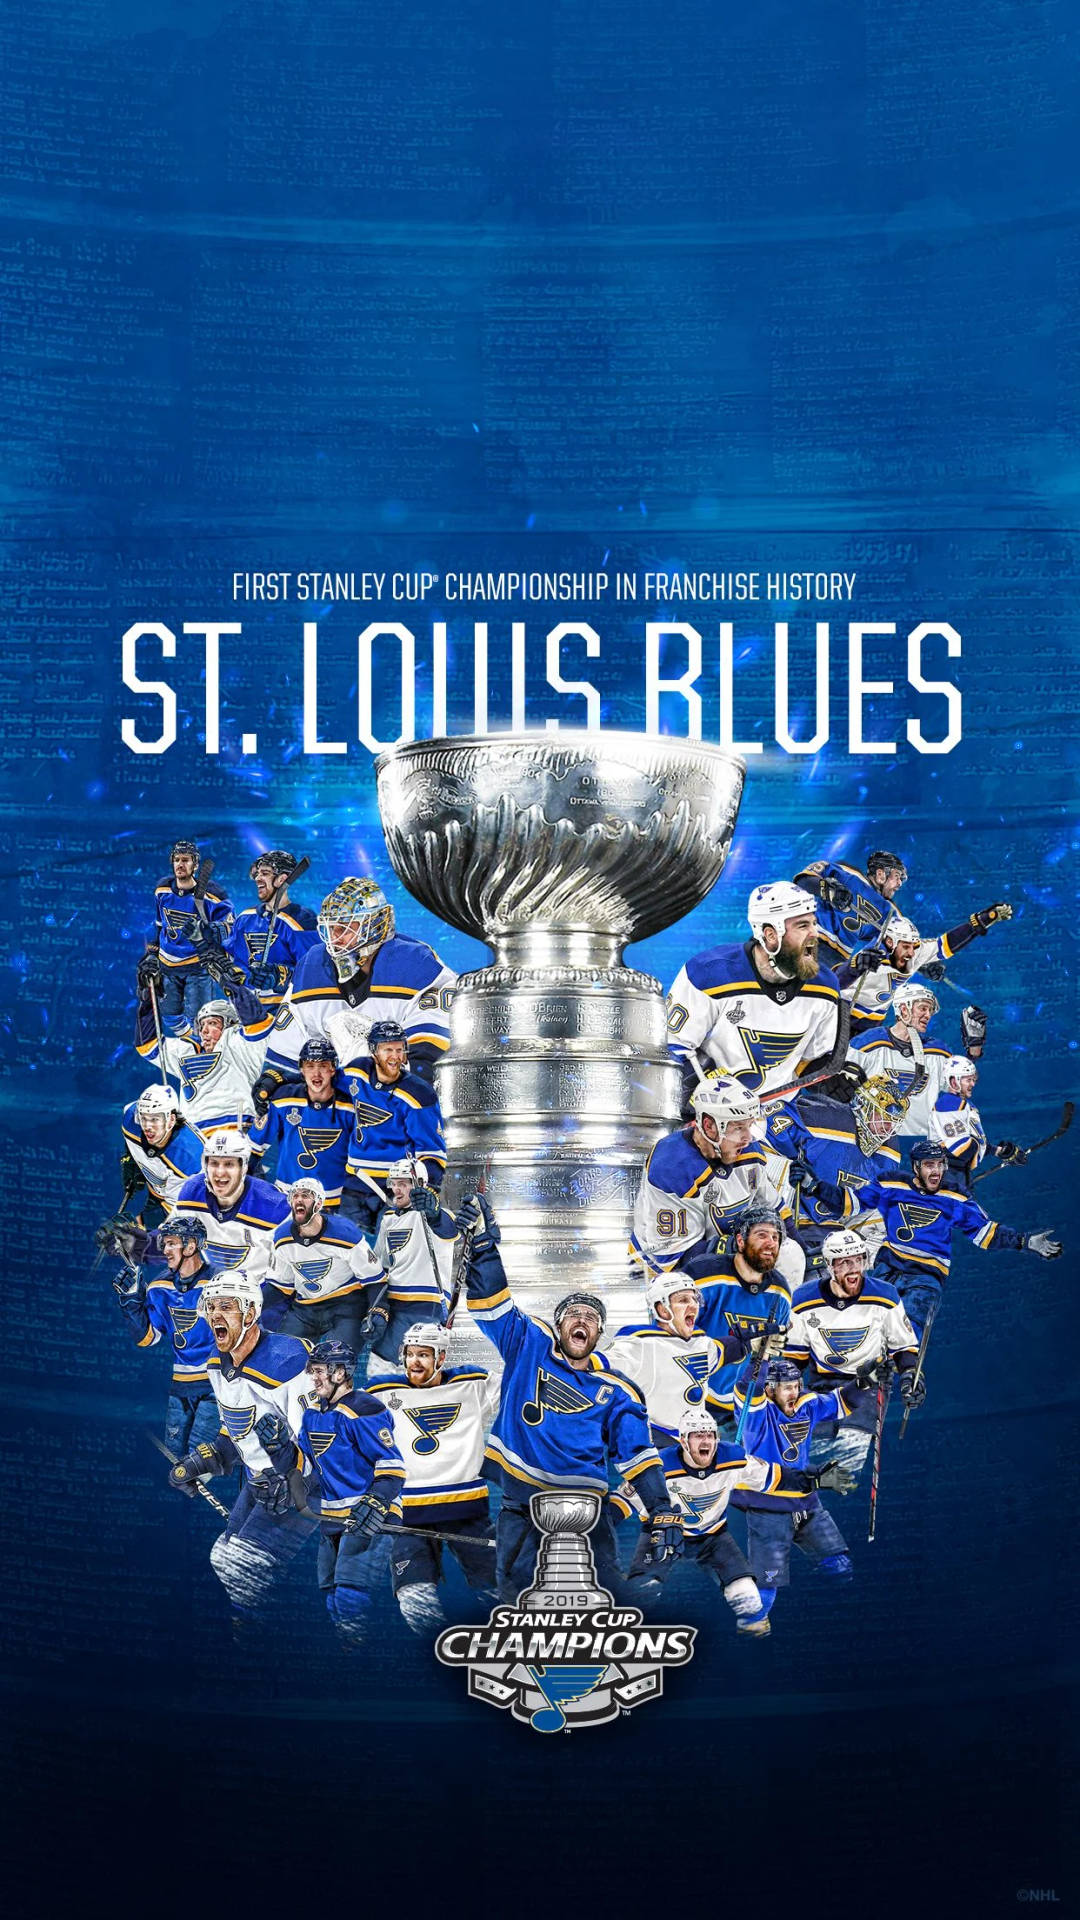 Stanley Cup Champion St. Louis Blues Celebrating Victory Background